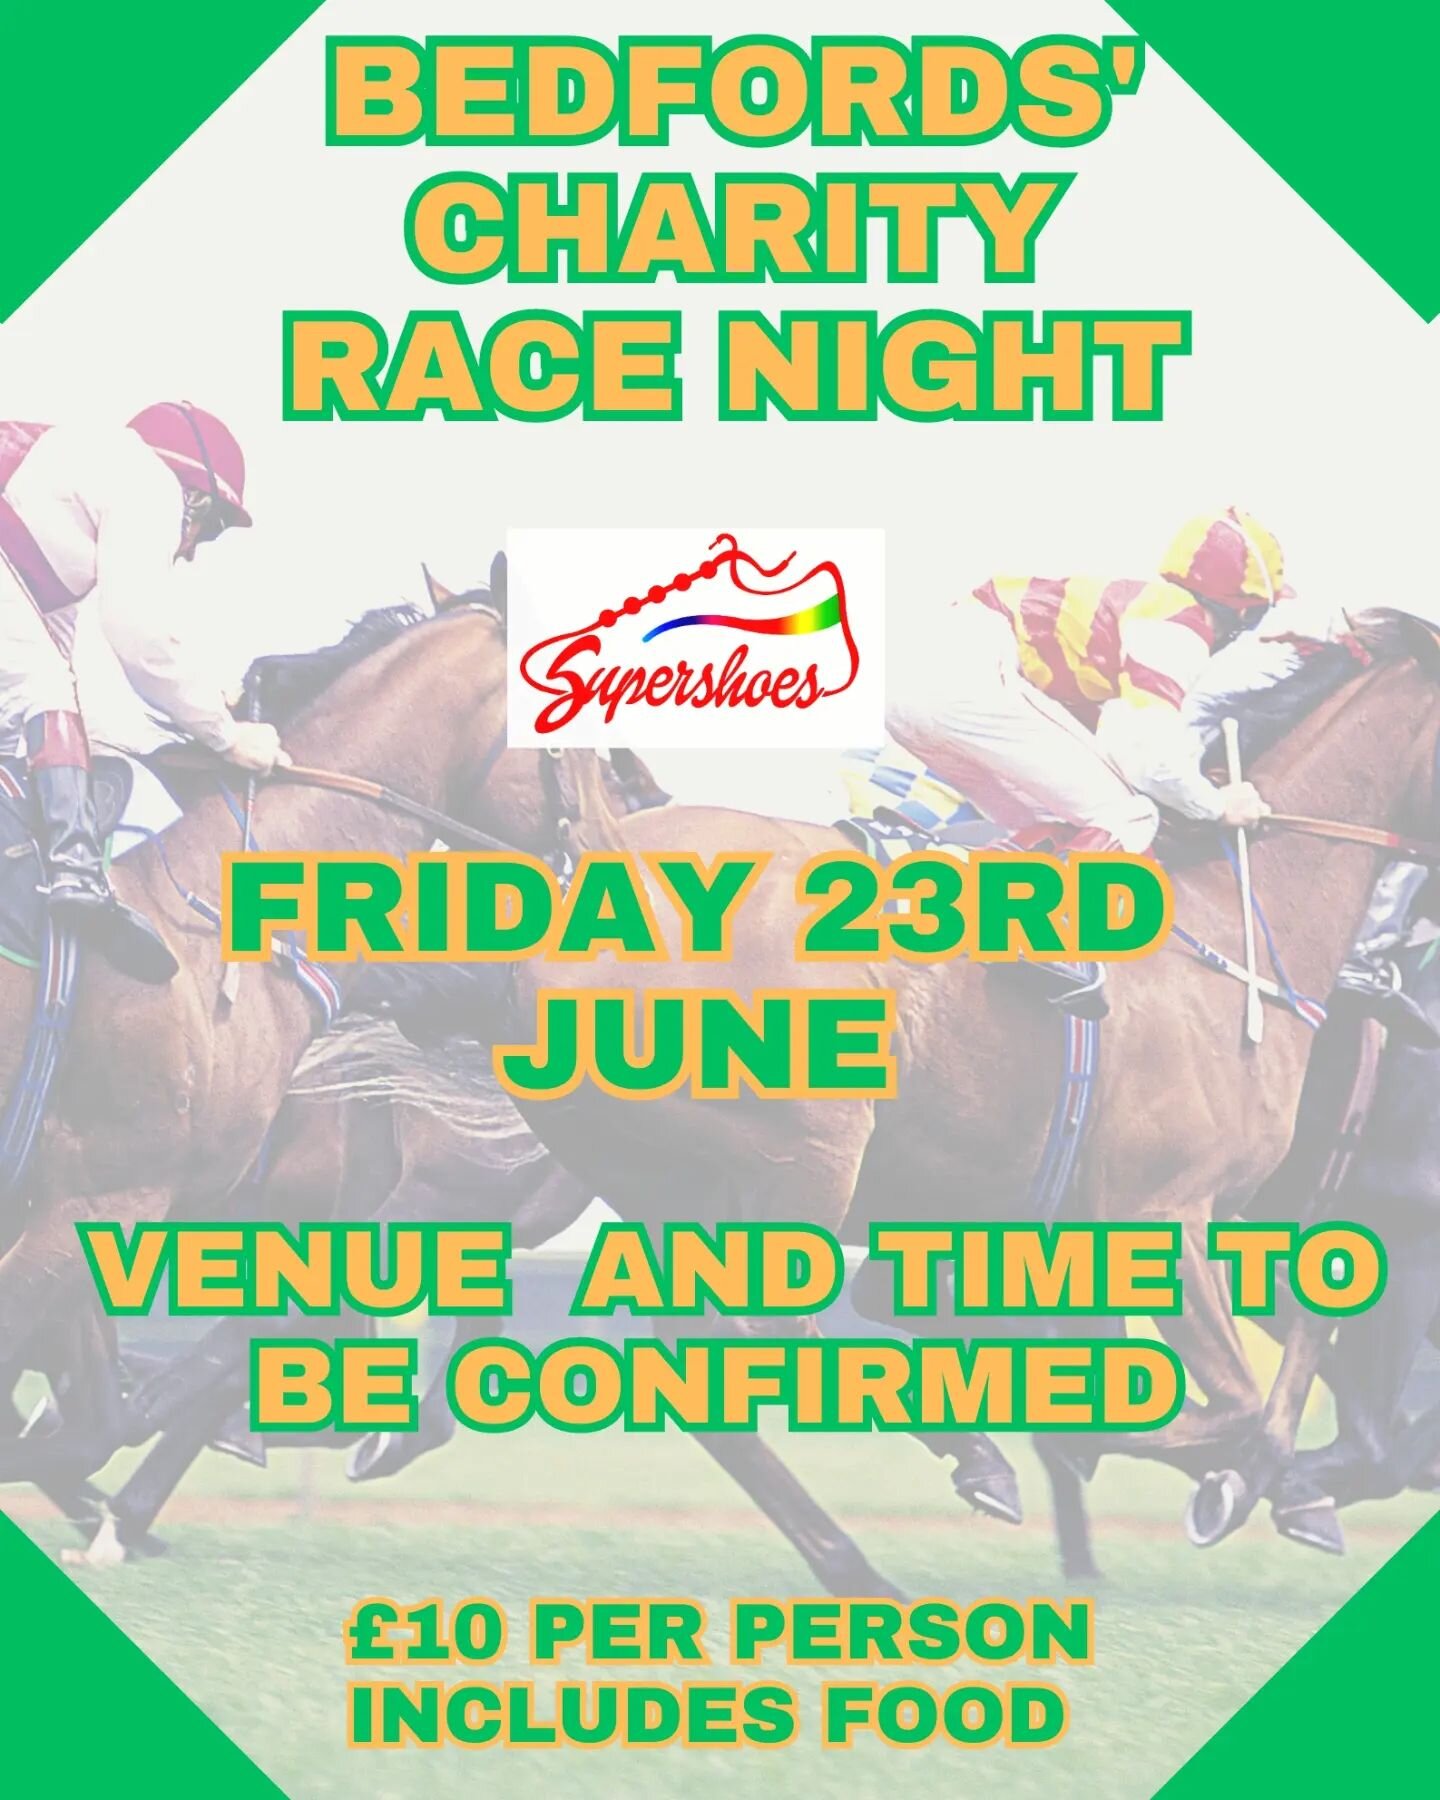 🐎 SAVE THE DATE 🐎
Bedford YFC charity race night raising money for our club charity @supershoesuk a children's cancer charity.
It should be a fun night for all! Please let us know if you'd like to come along.
@bedsyfc